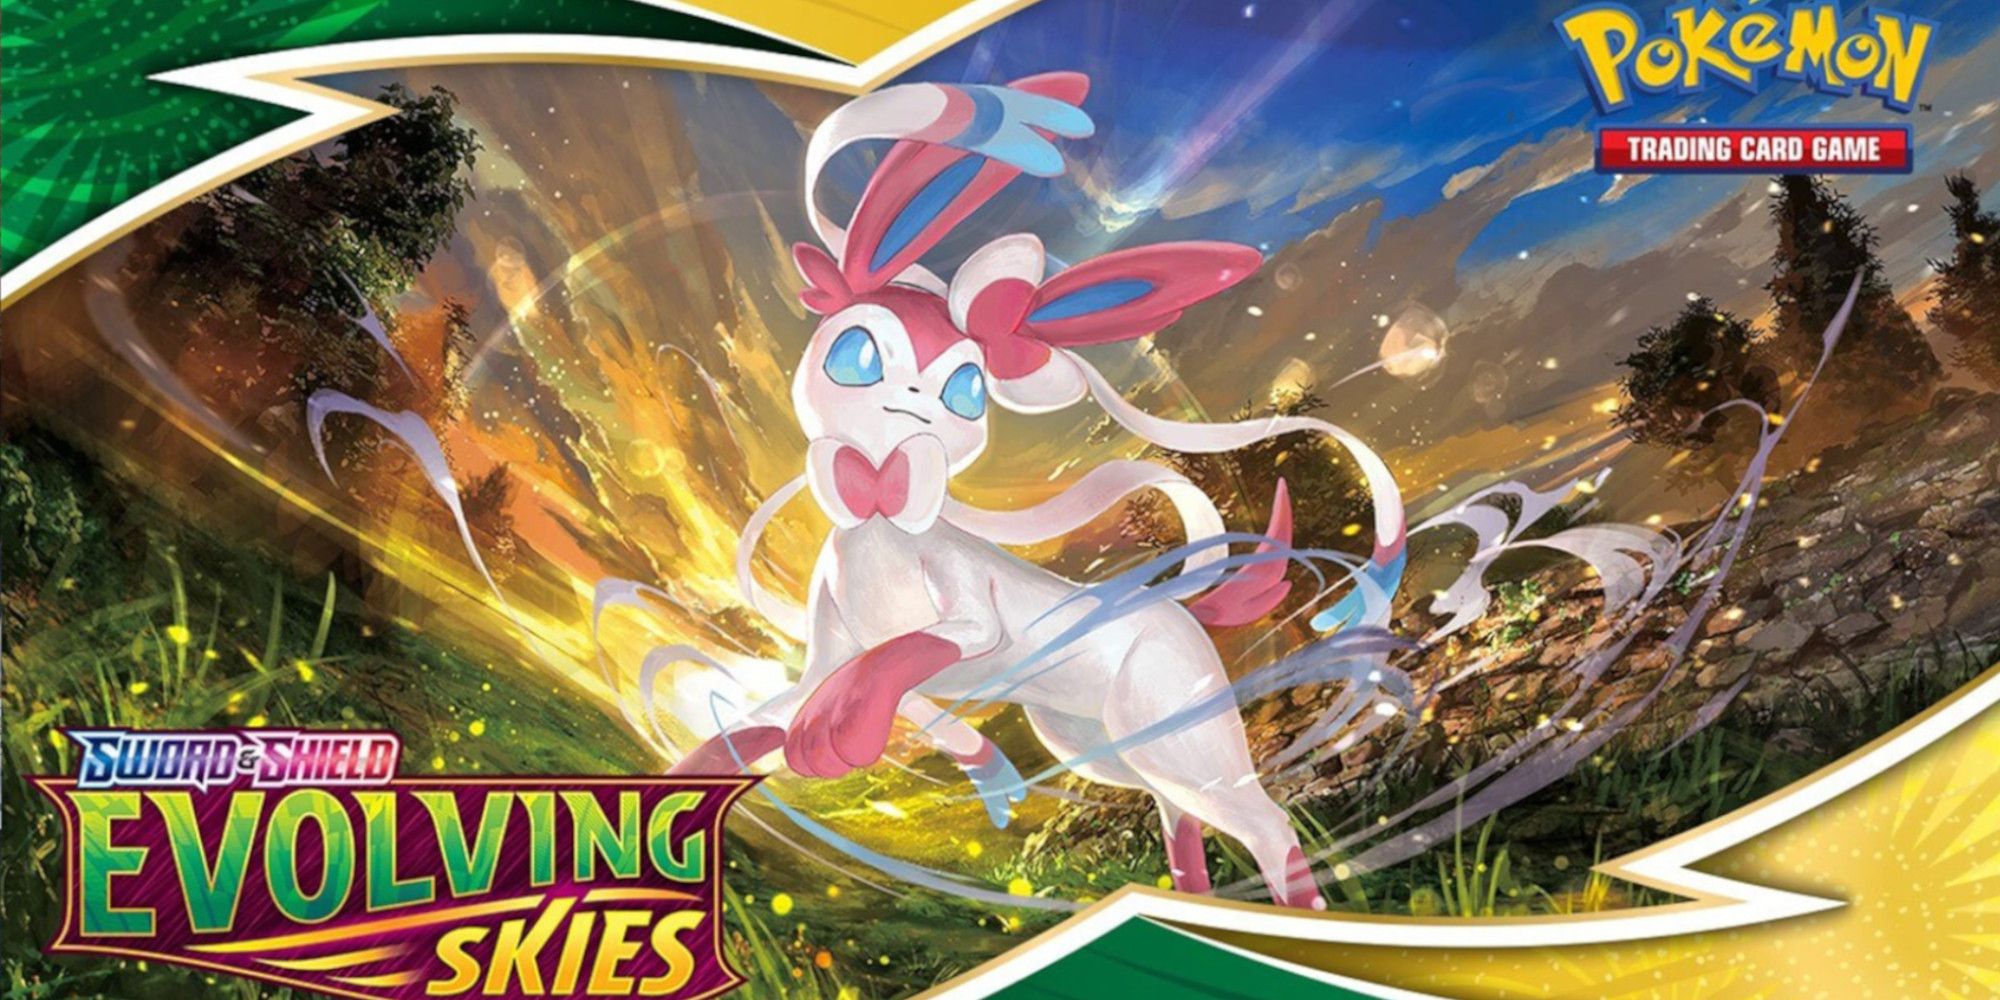 August Pokemon Card Products Include Hoenn Pack And New Set Evolving Skies